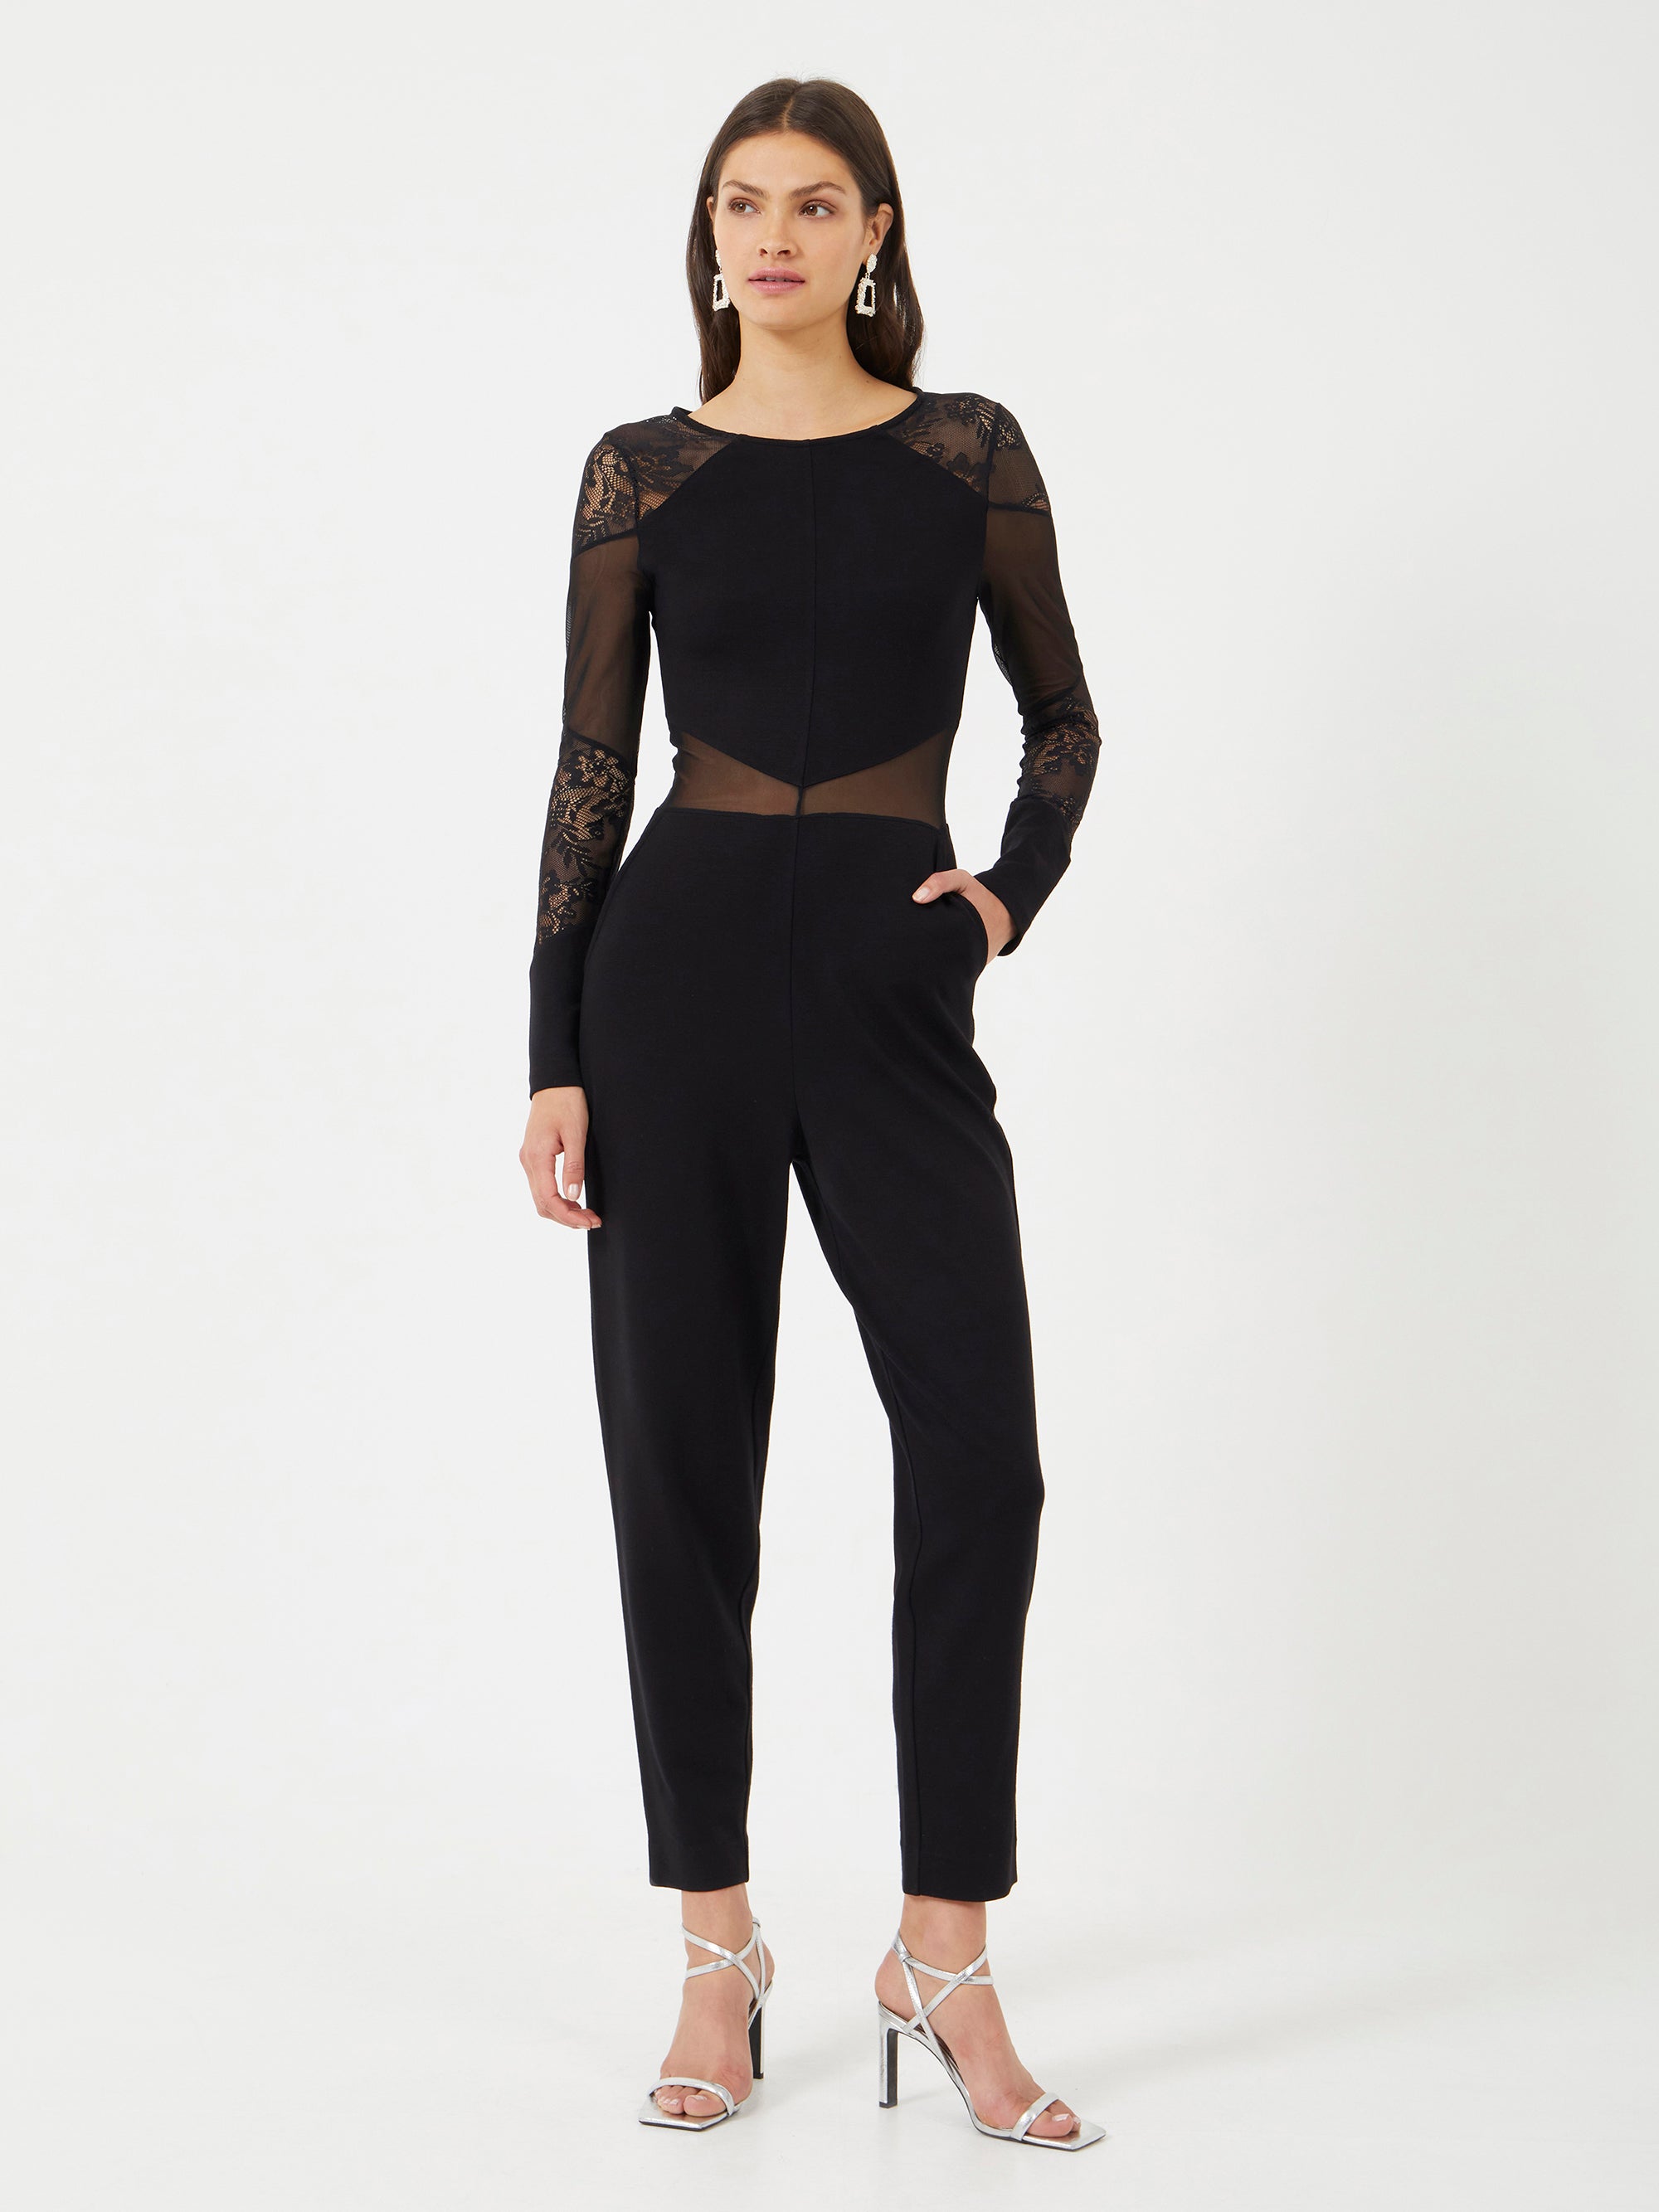 French Connection - Vivien Panelled Long Sleeved Jumpsuit | French Connection |  Jumpsuits & Playsuits | 06 - Black - Size: 6